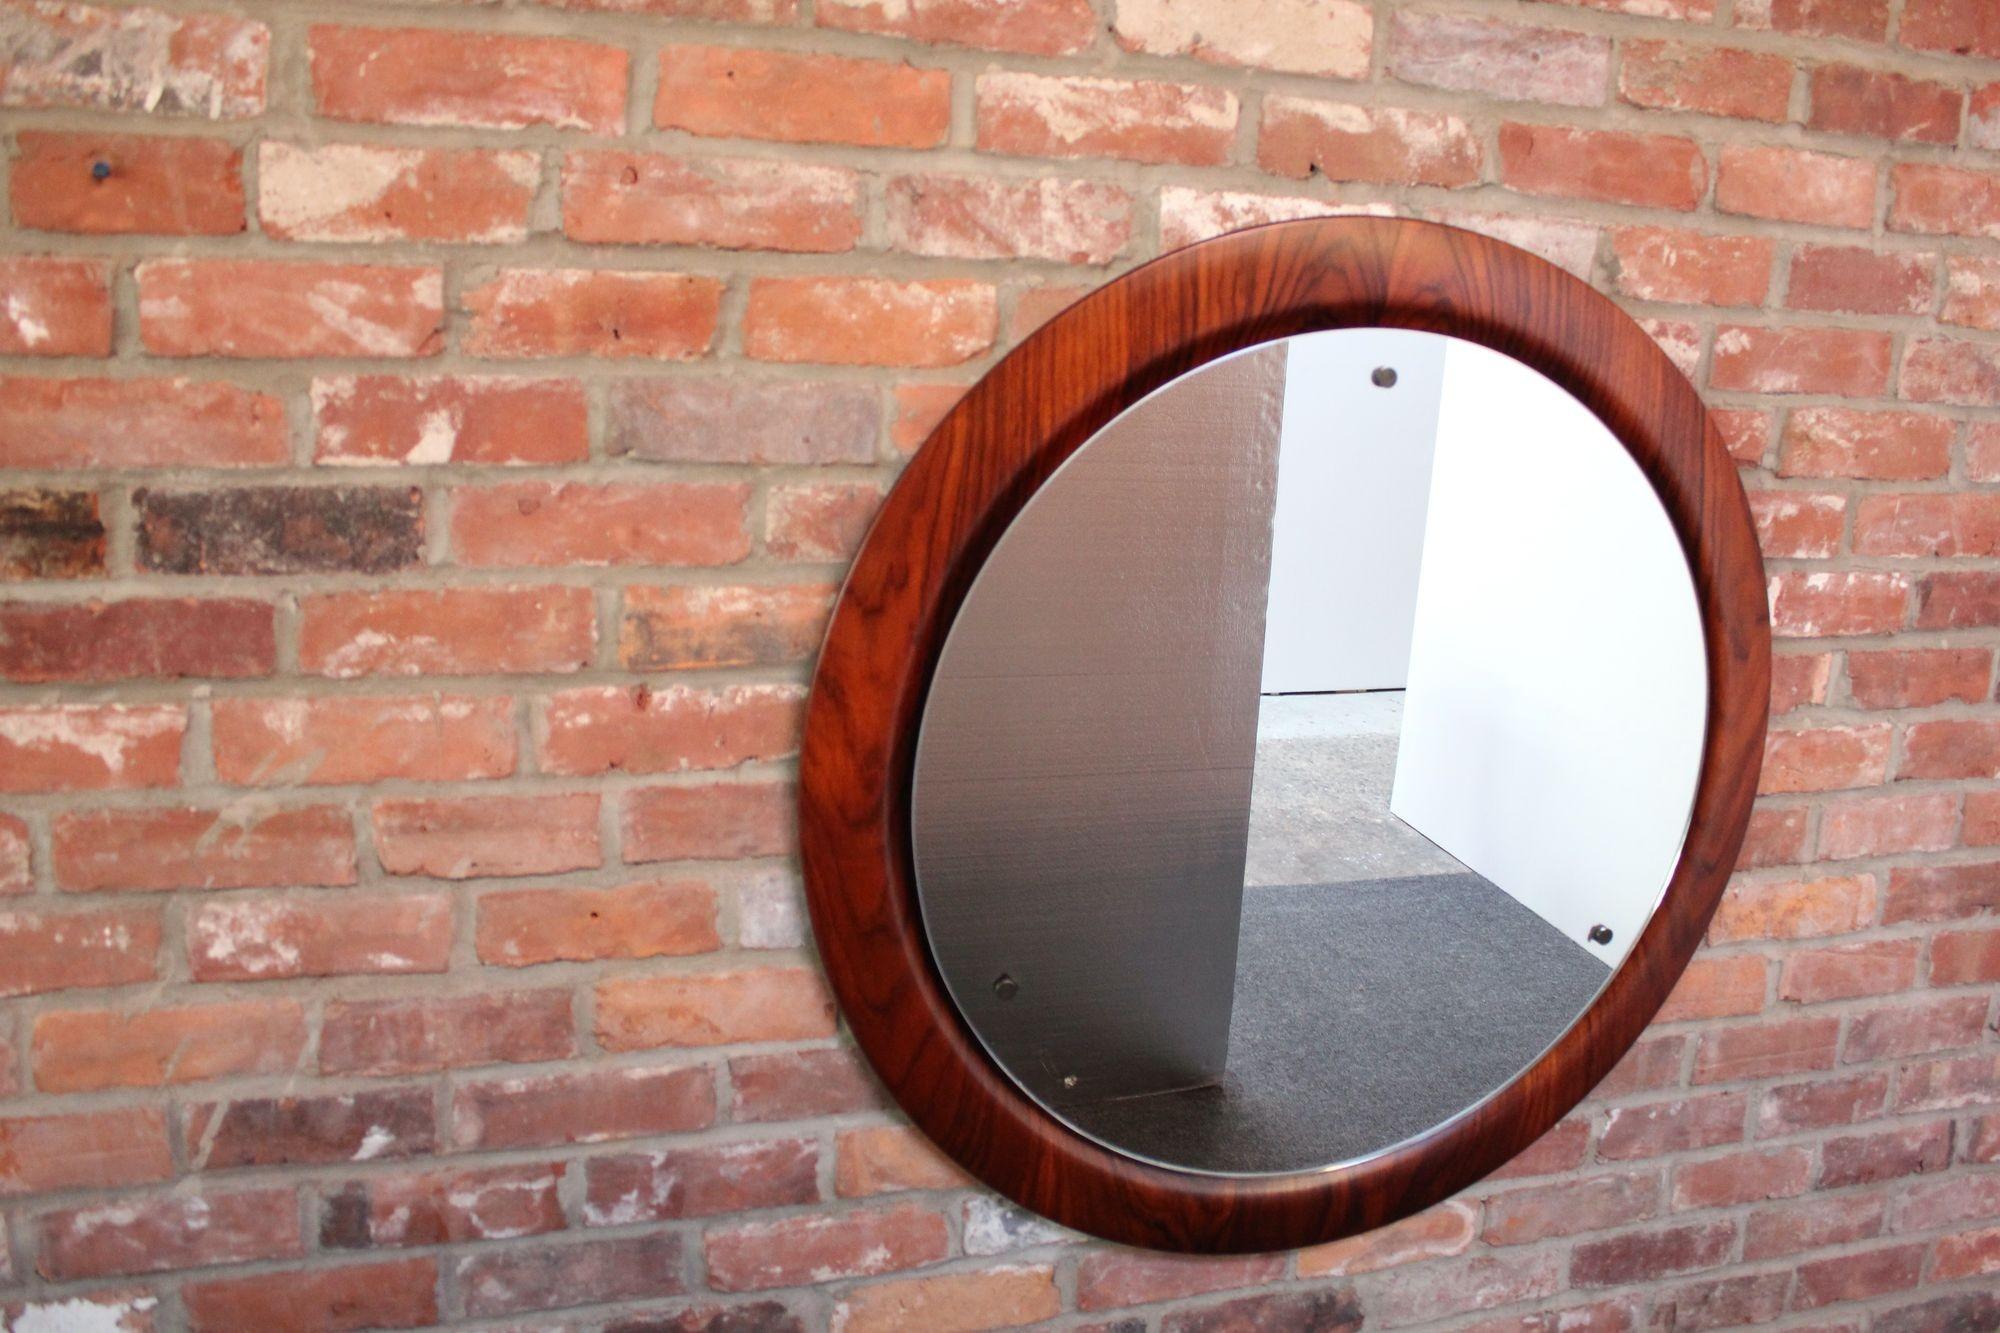 Italian Modern rosewood ply round mirror with three round chrome embellishments by Mac Arredamenti (circa 1960s, Meda/Seveso, Italy).
Wood has been conservatively refinished; mirror glass is clean sans one spot of foxing around the lower right